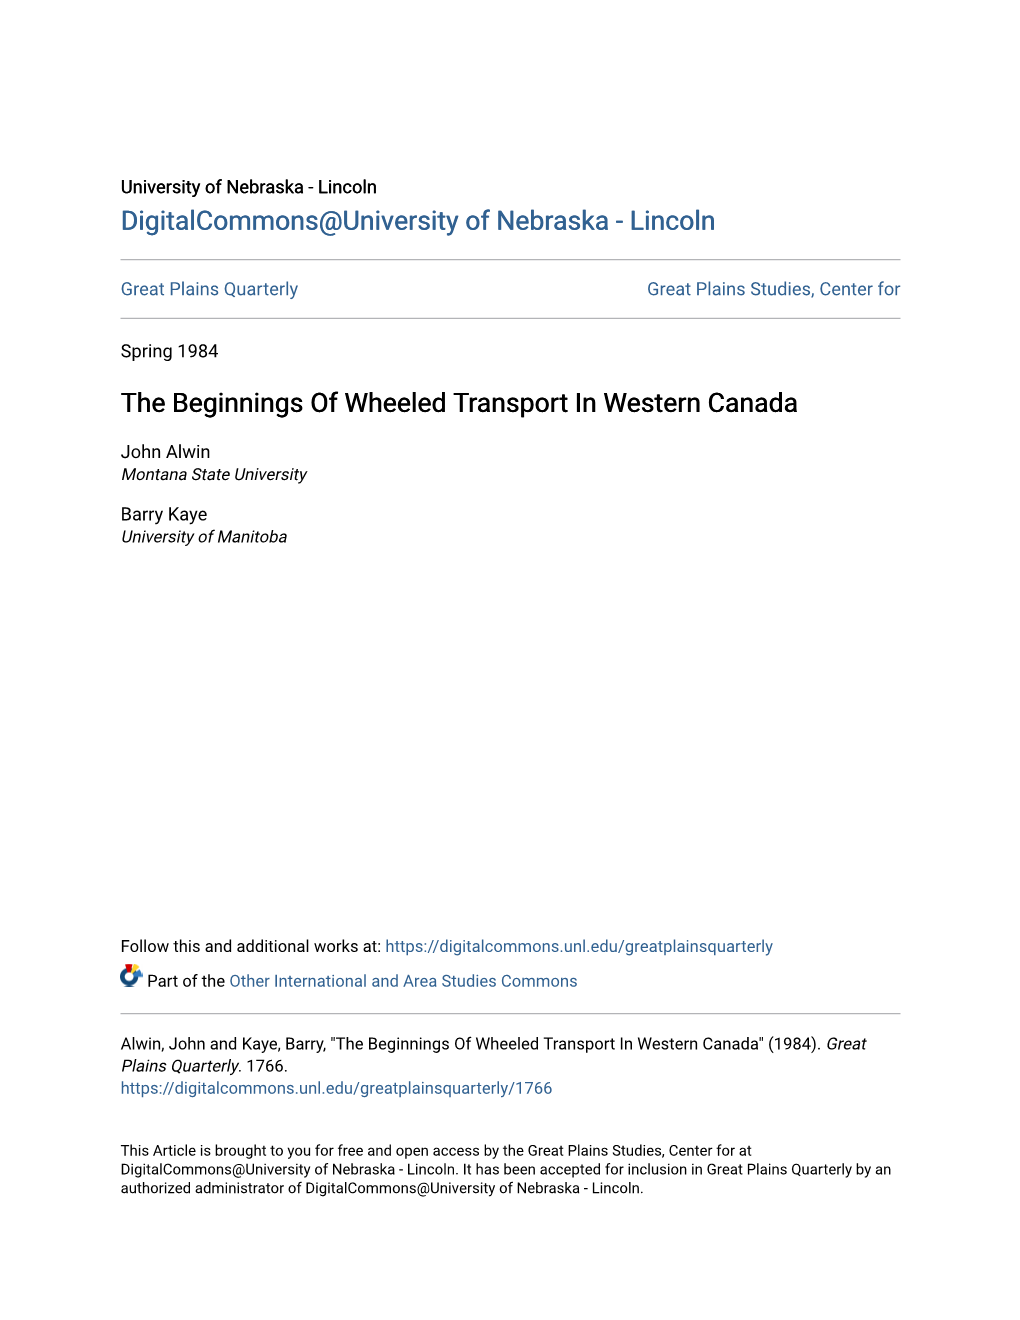 The Beginnings of Wheeled Transport in Western Canada